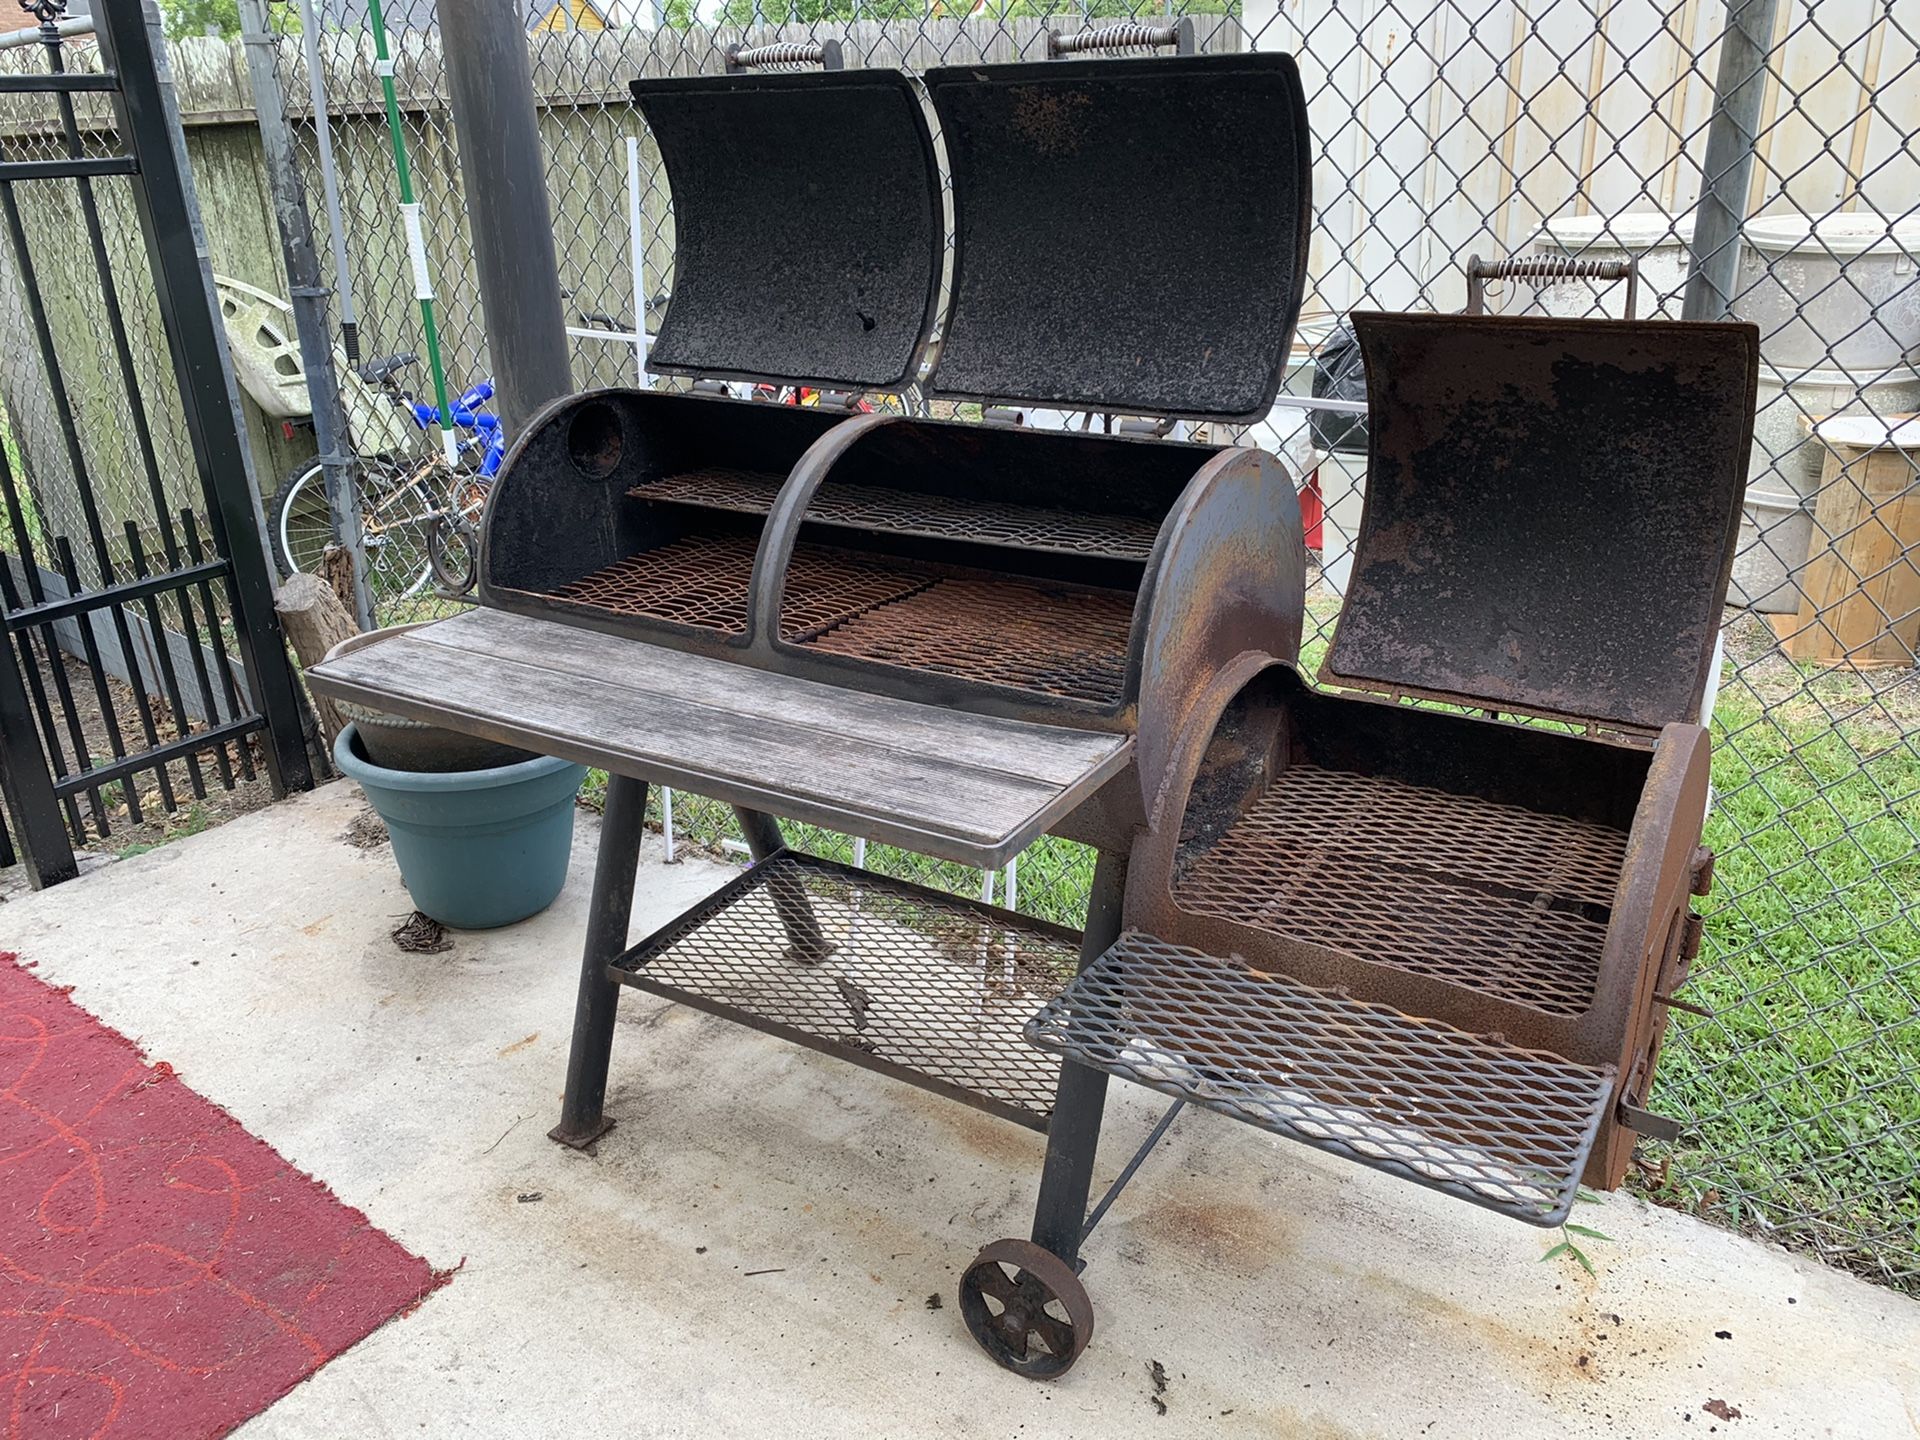 Barbecue BBQ Grill Smoker Pit